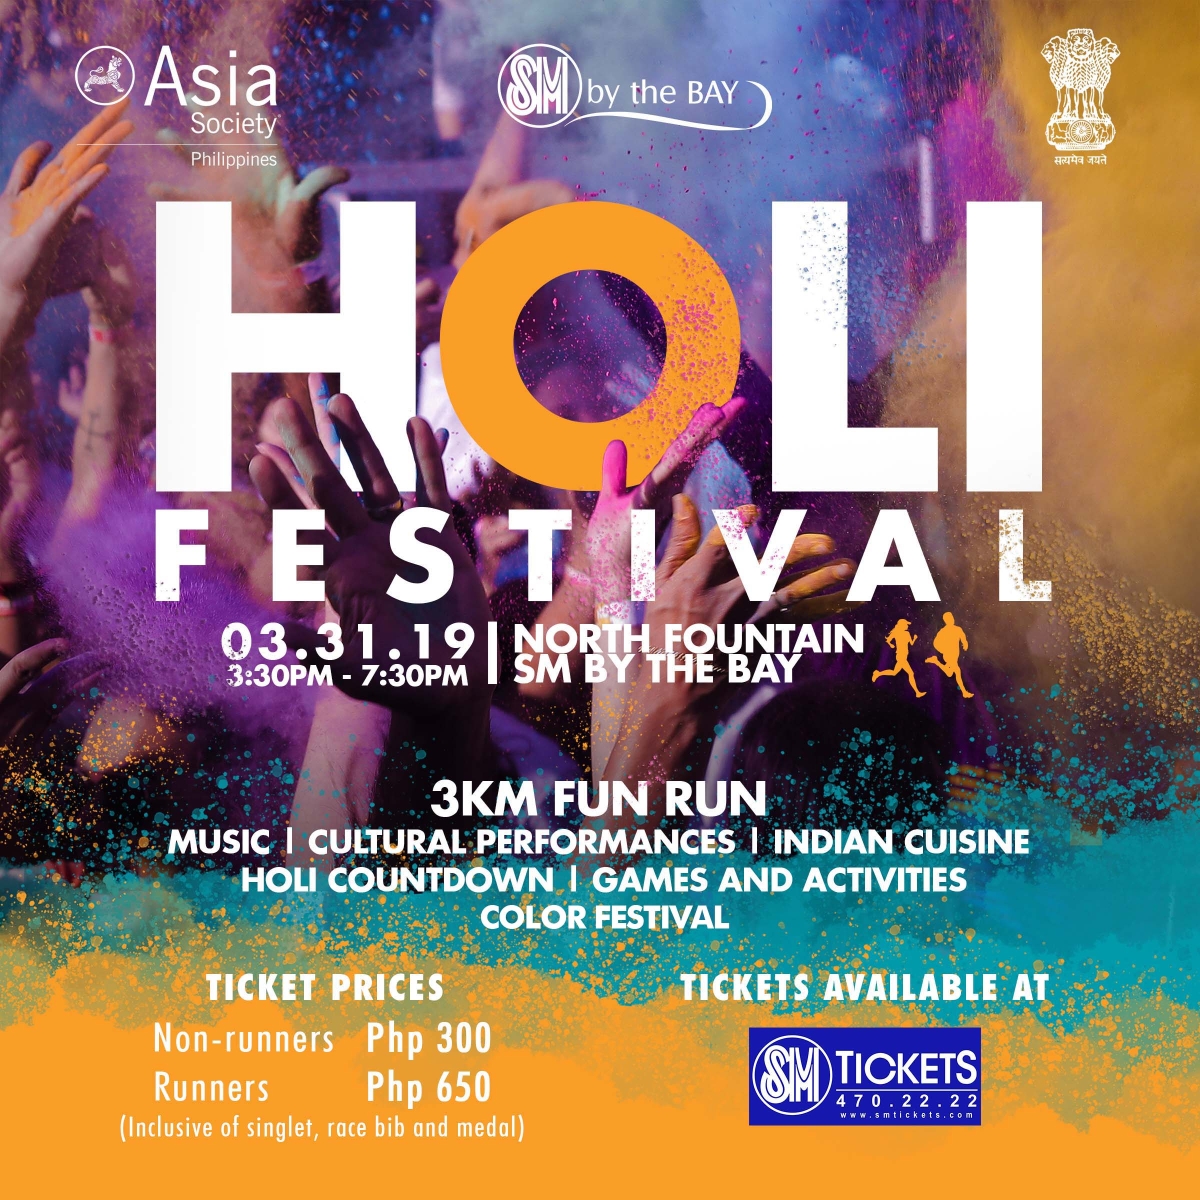 Holi Festival 2019 | 31 March 2019, 3:30 PM | North Fountain, SM by the BAY